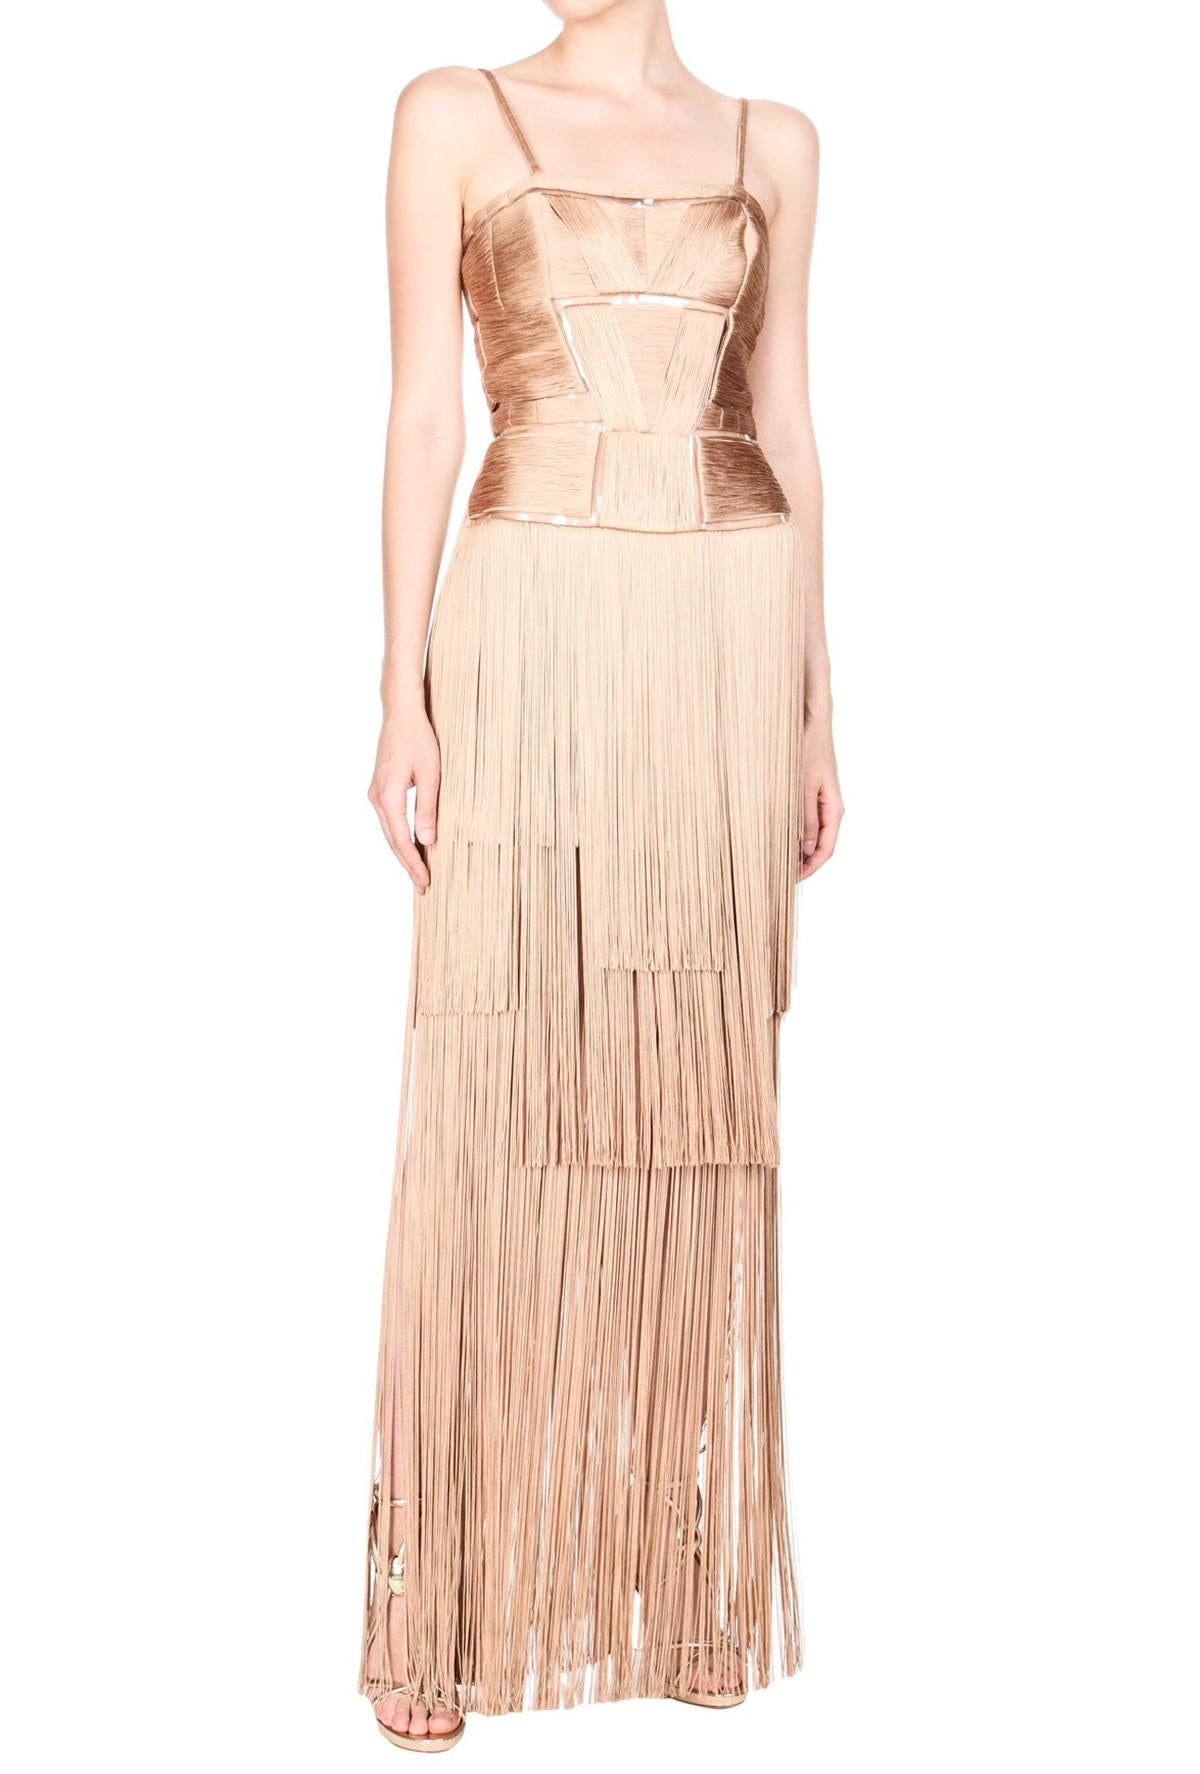 Women's New Versace Nude Naked Spectacular Fringe Long Silk Corset Dress Gown It.  44